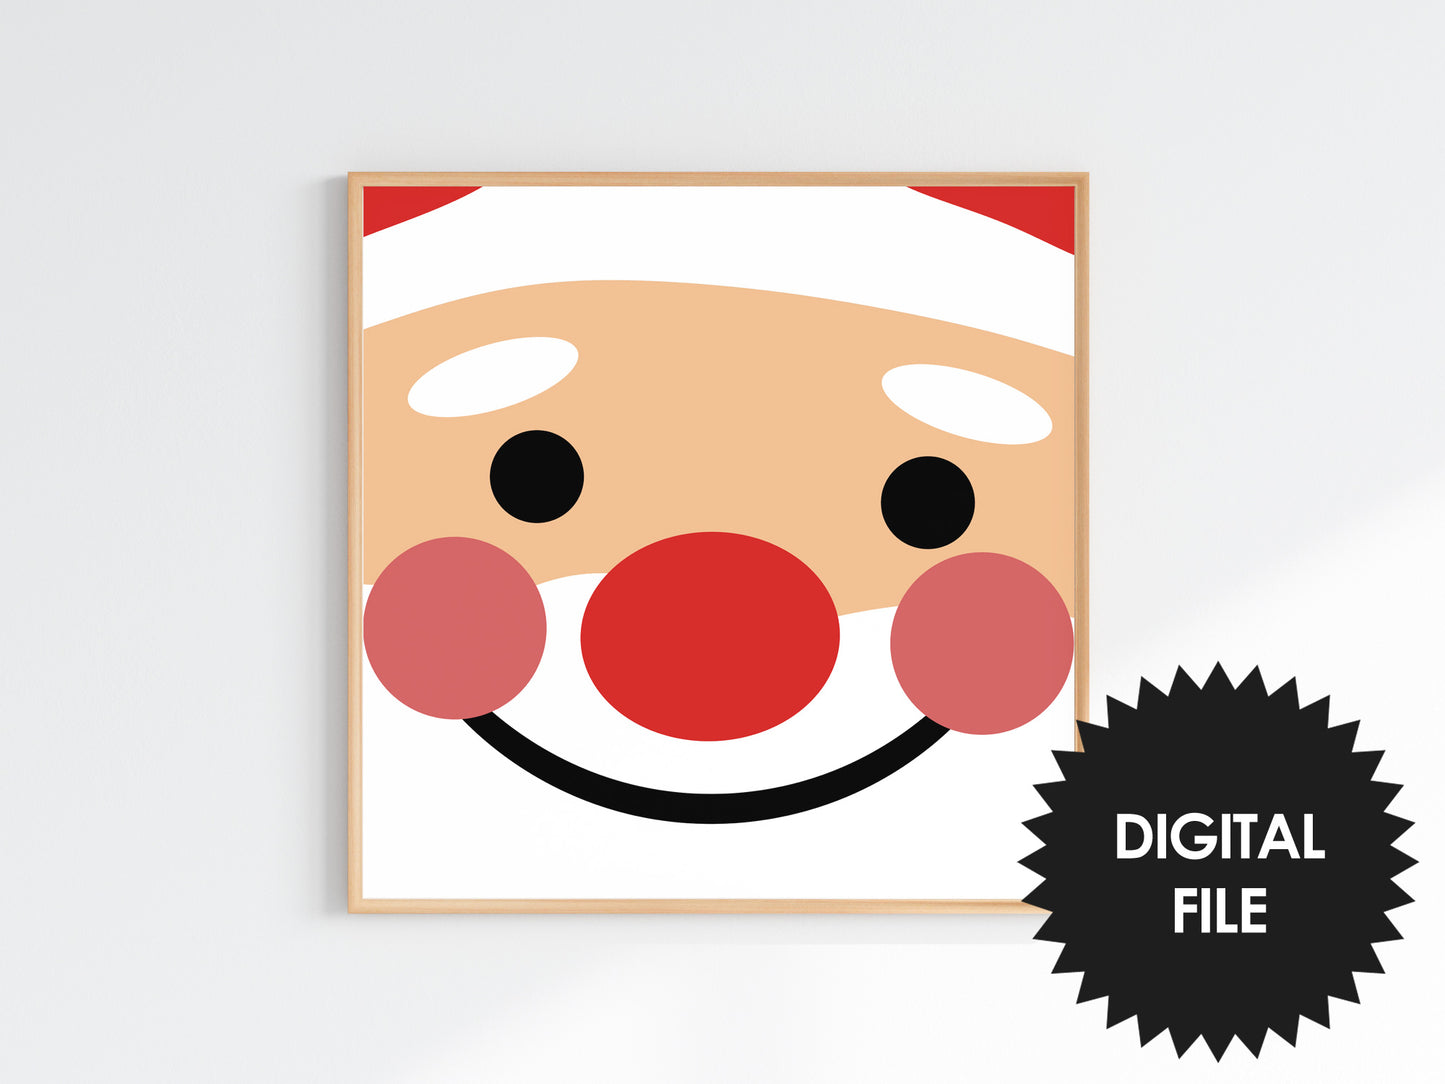 Christmas Wall Art Printables For Kids Set of 3, Santa, Snowman and Penguin Print, Digital Download, Print Any Size Up To 20x20 inch